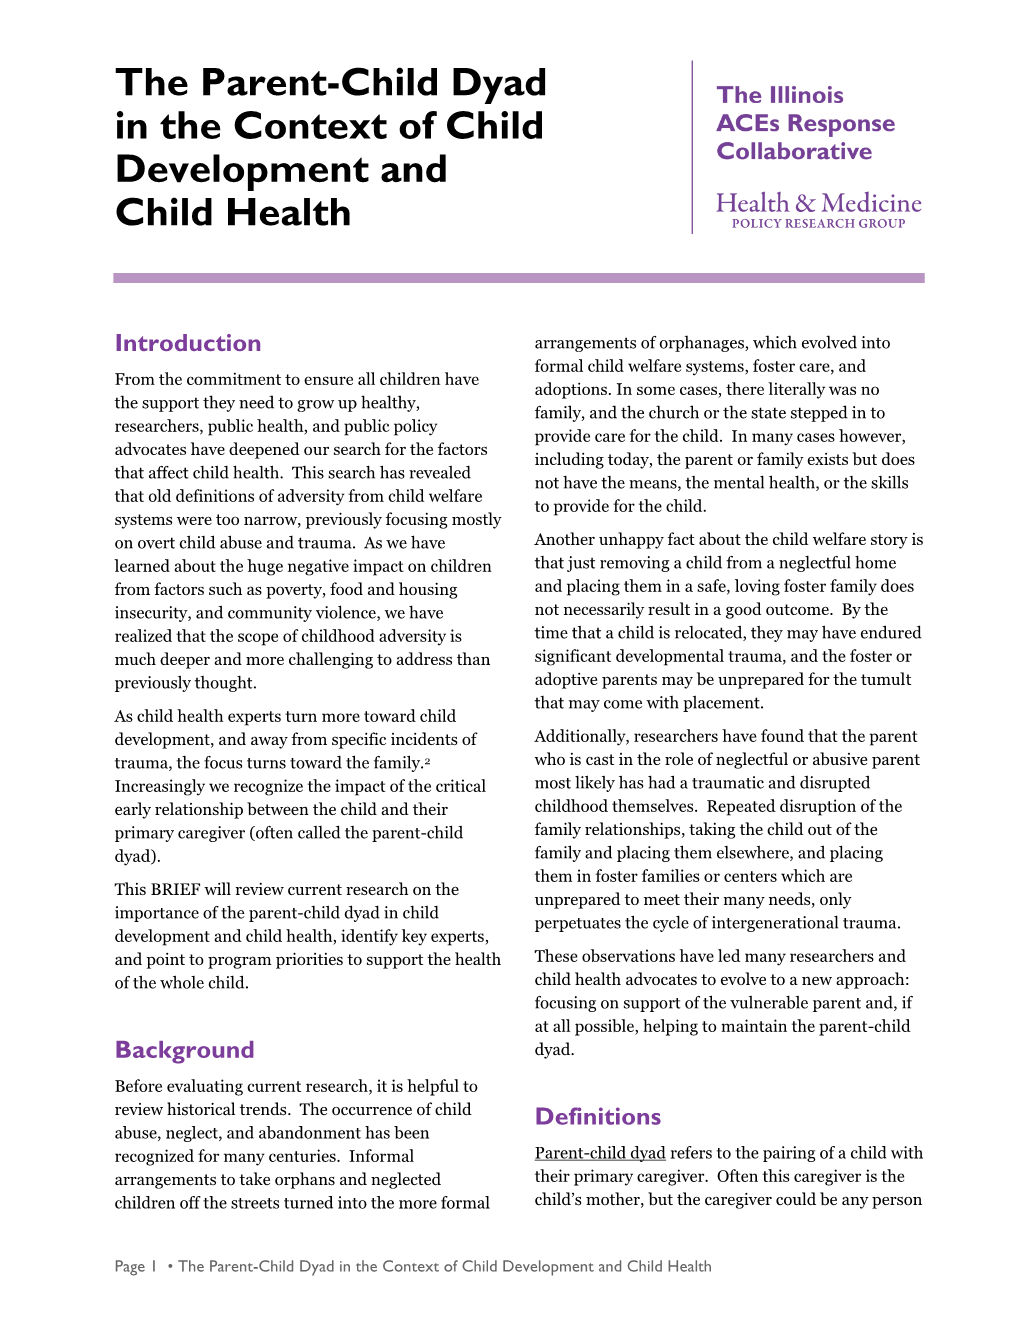 The Parent-Child Dyad in the Context of Child Development and Child Health Who Assumes a Consistent Role of Daily Care Over an Extended Period with a Developing Child